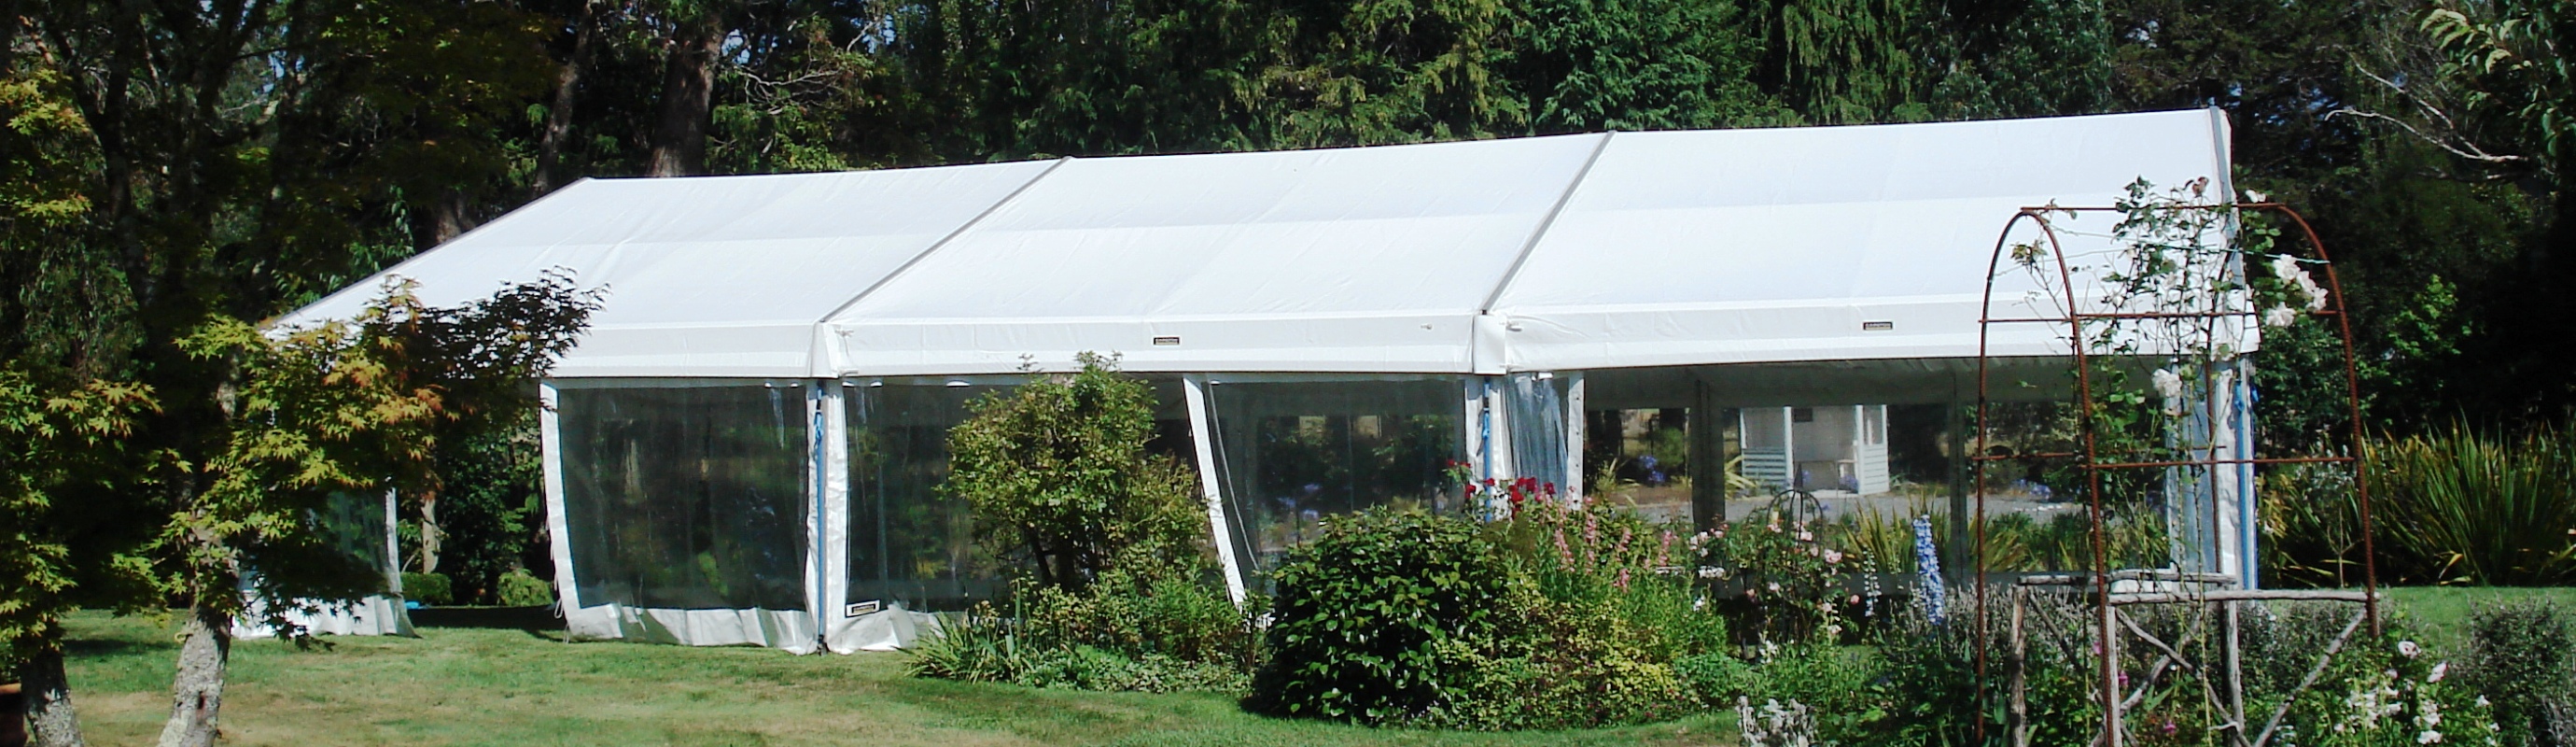 Marquee hire in Auckland | Carlton Party Hire